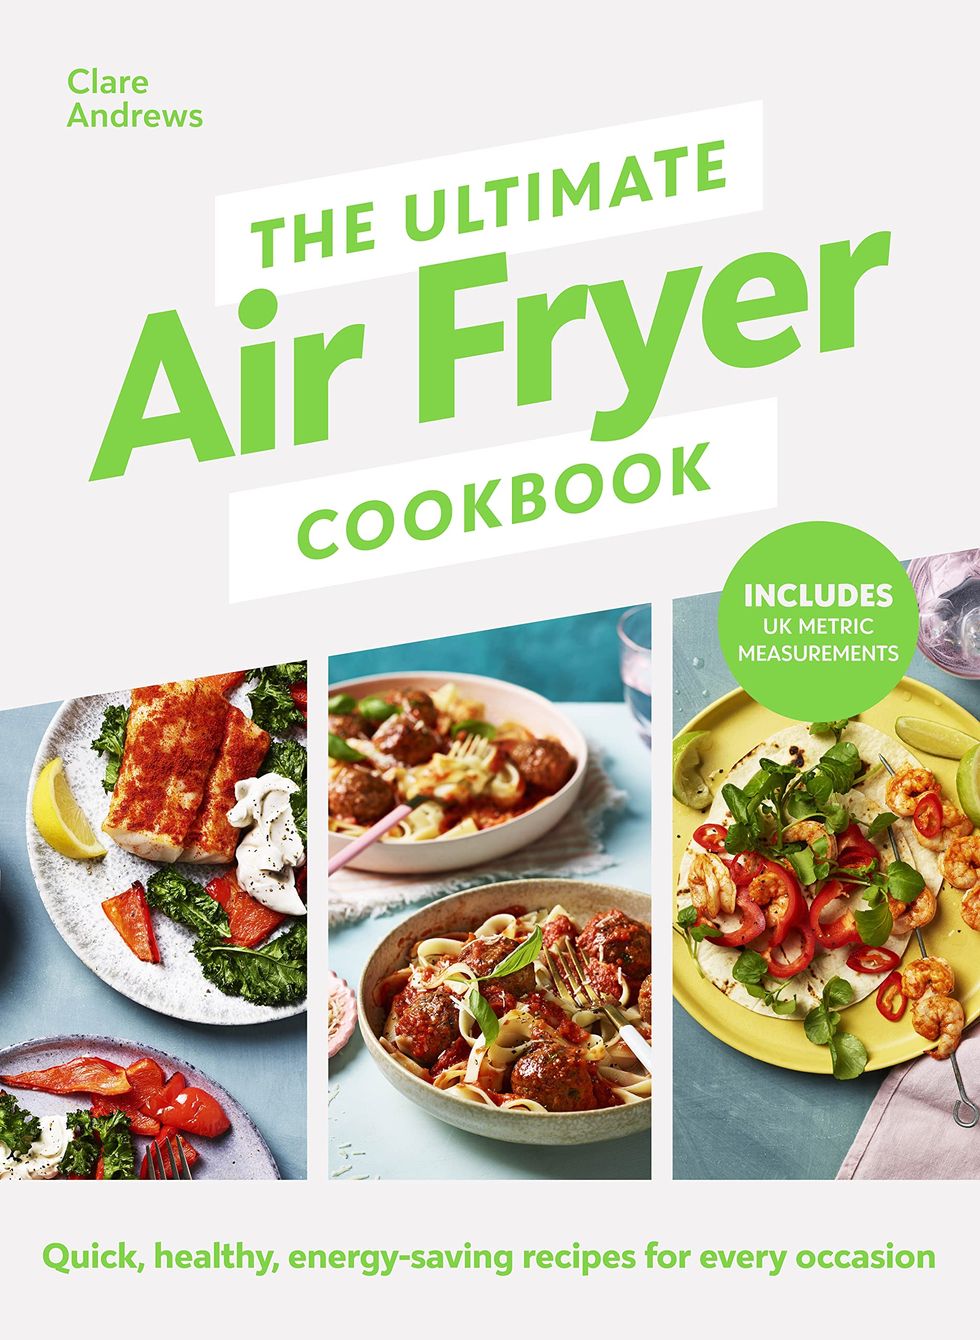 The Ultimate Air Fryer Cookbook by Clare Andrews